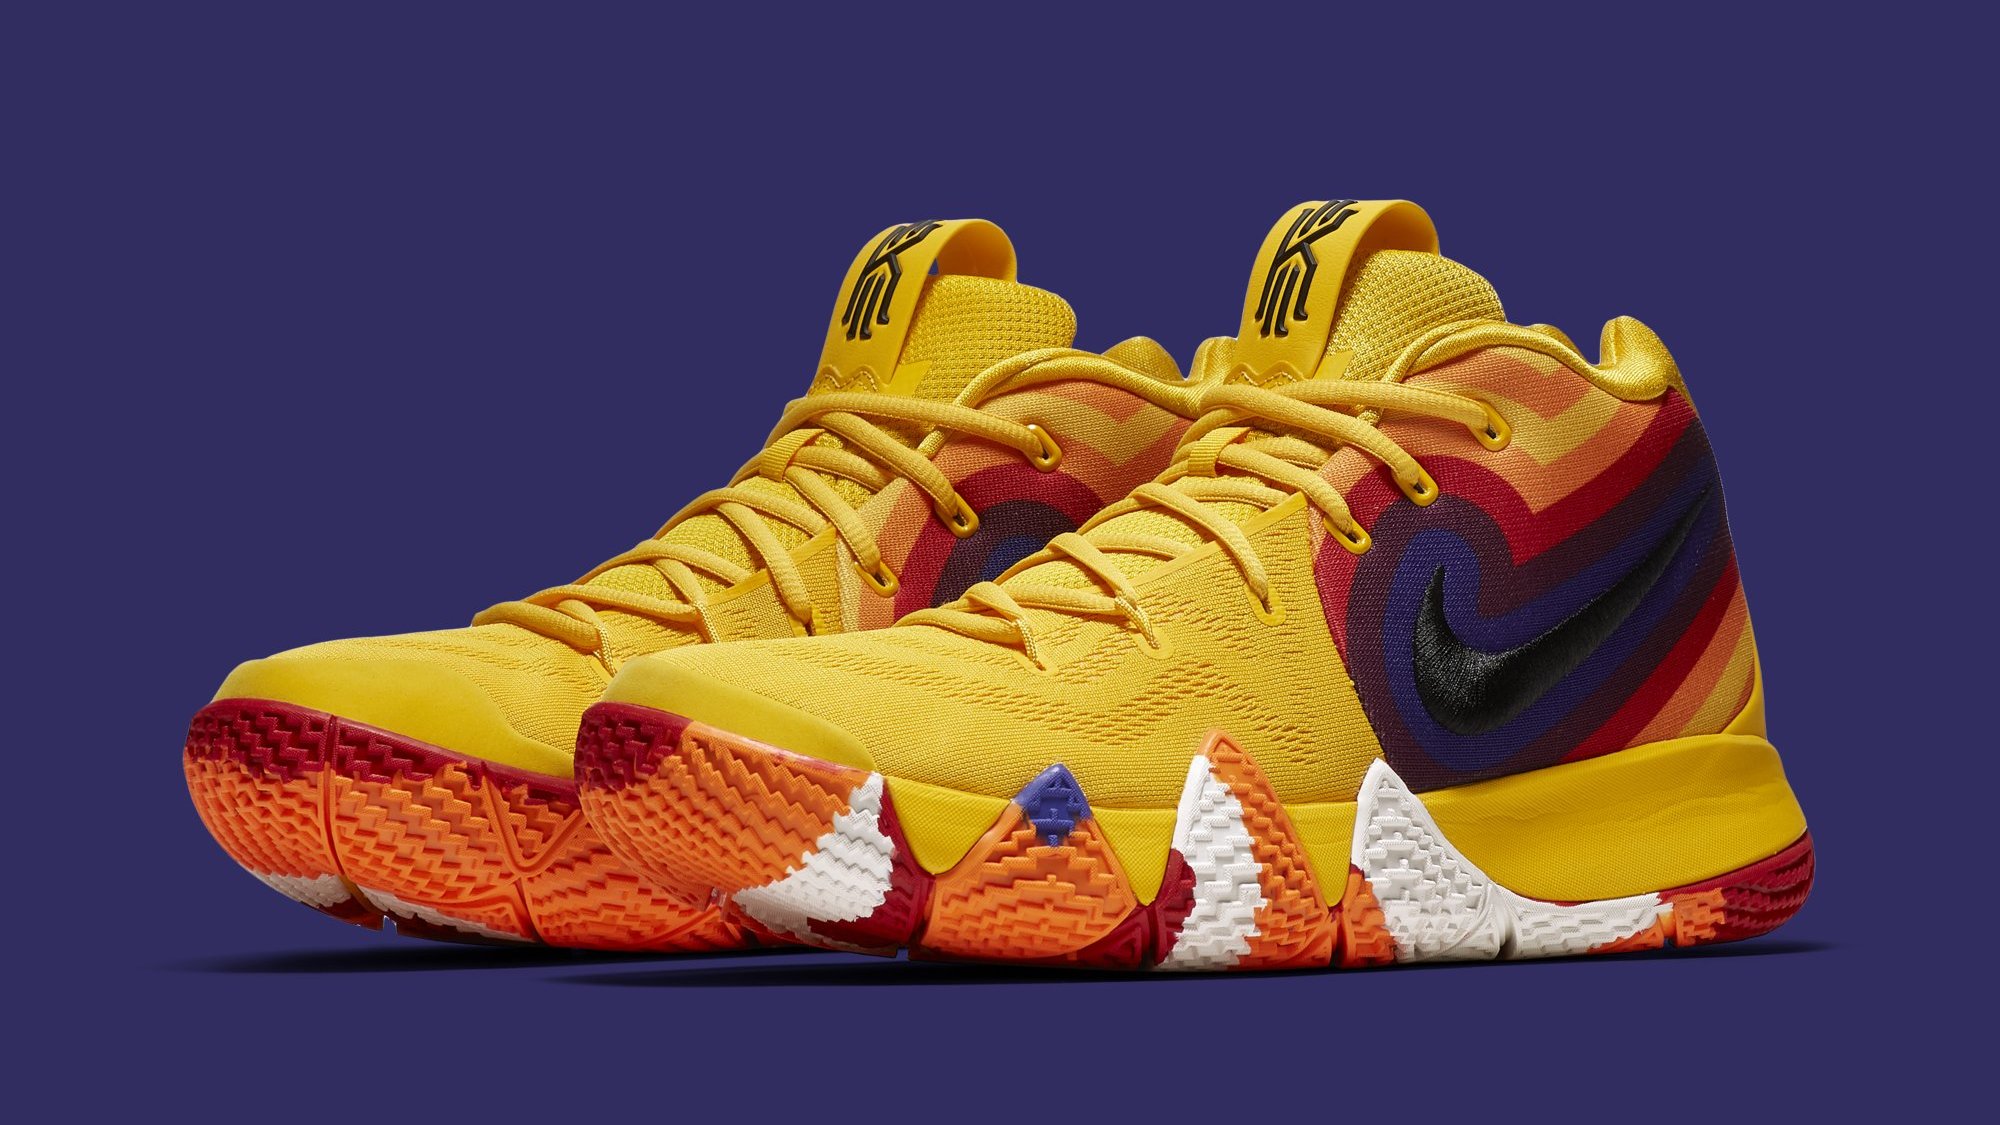 kyrie yellow